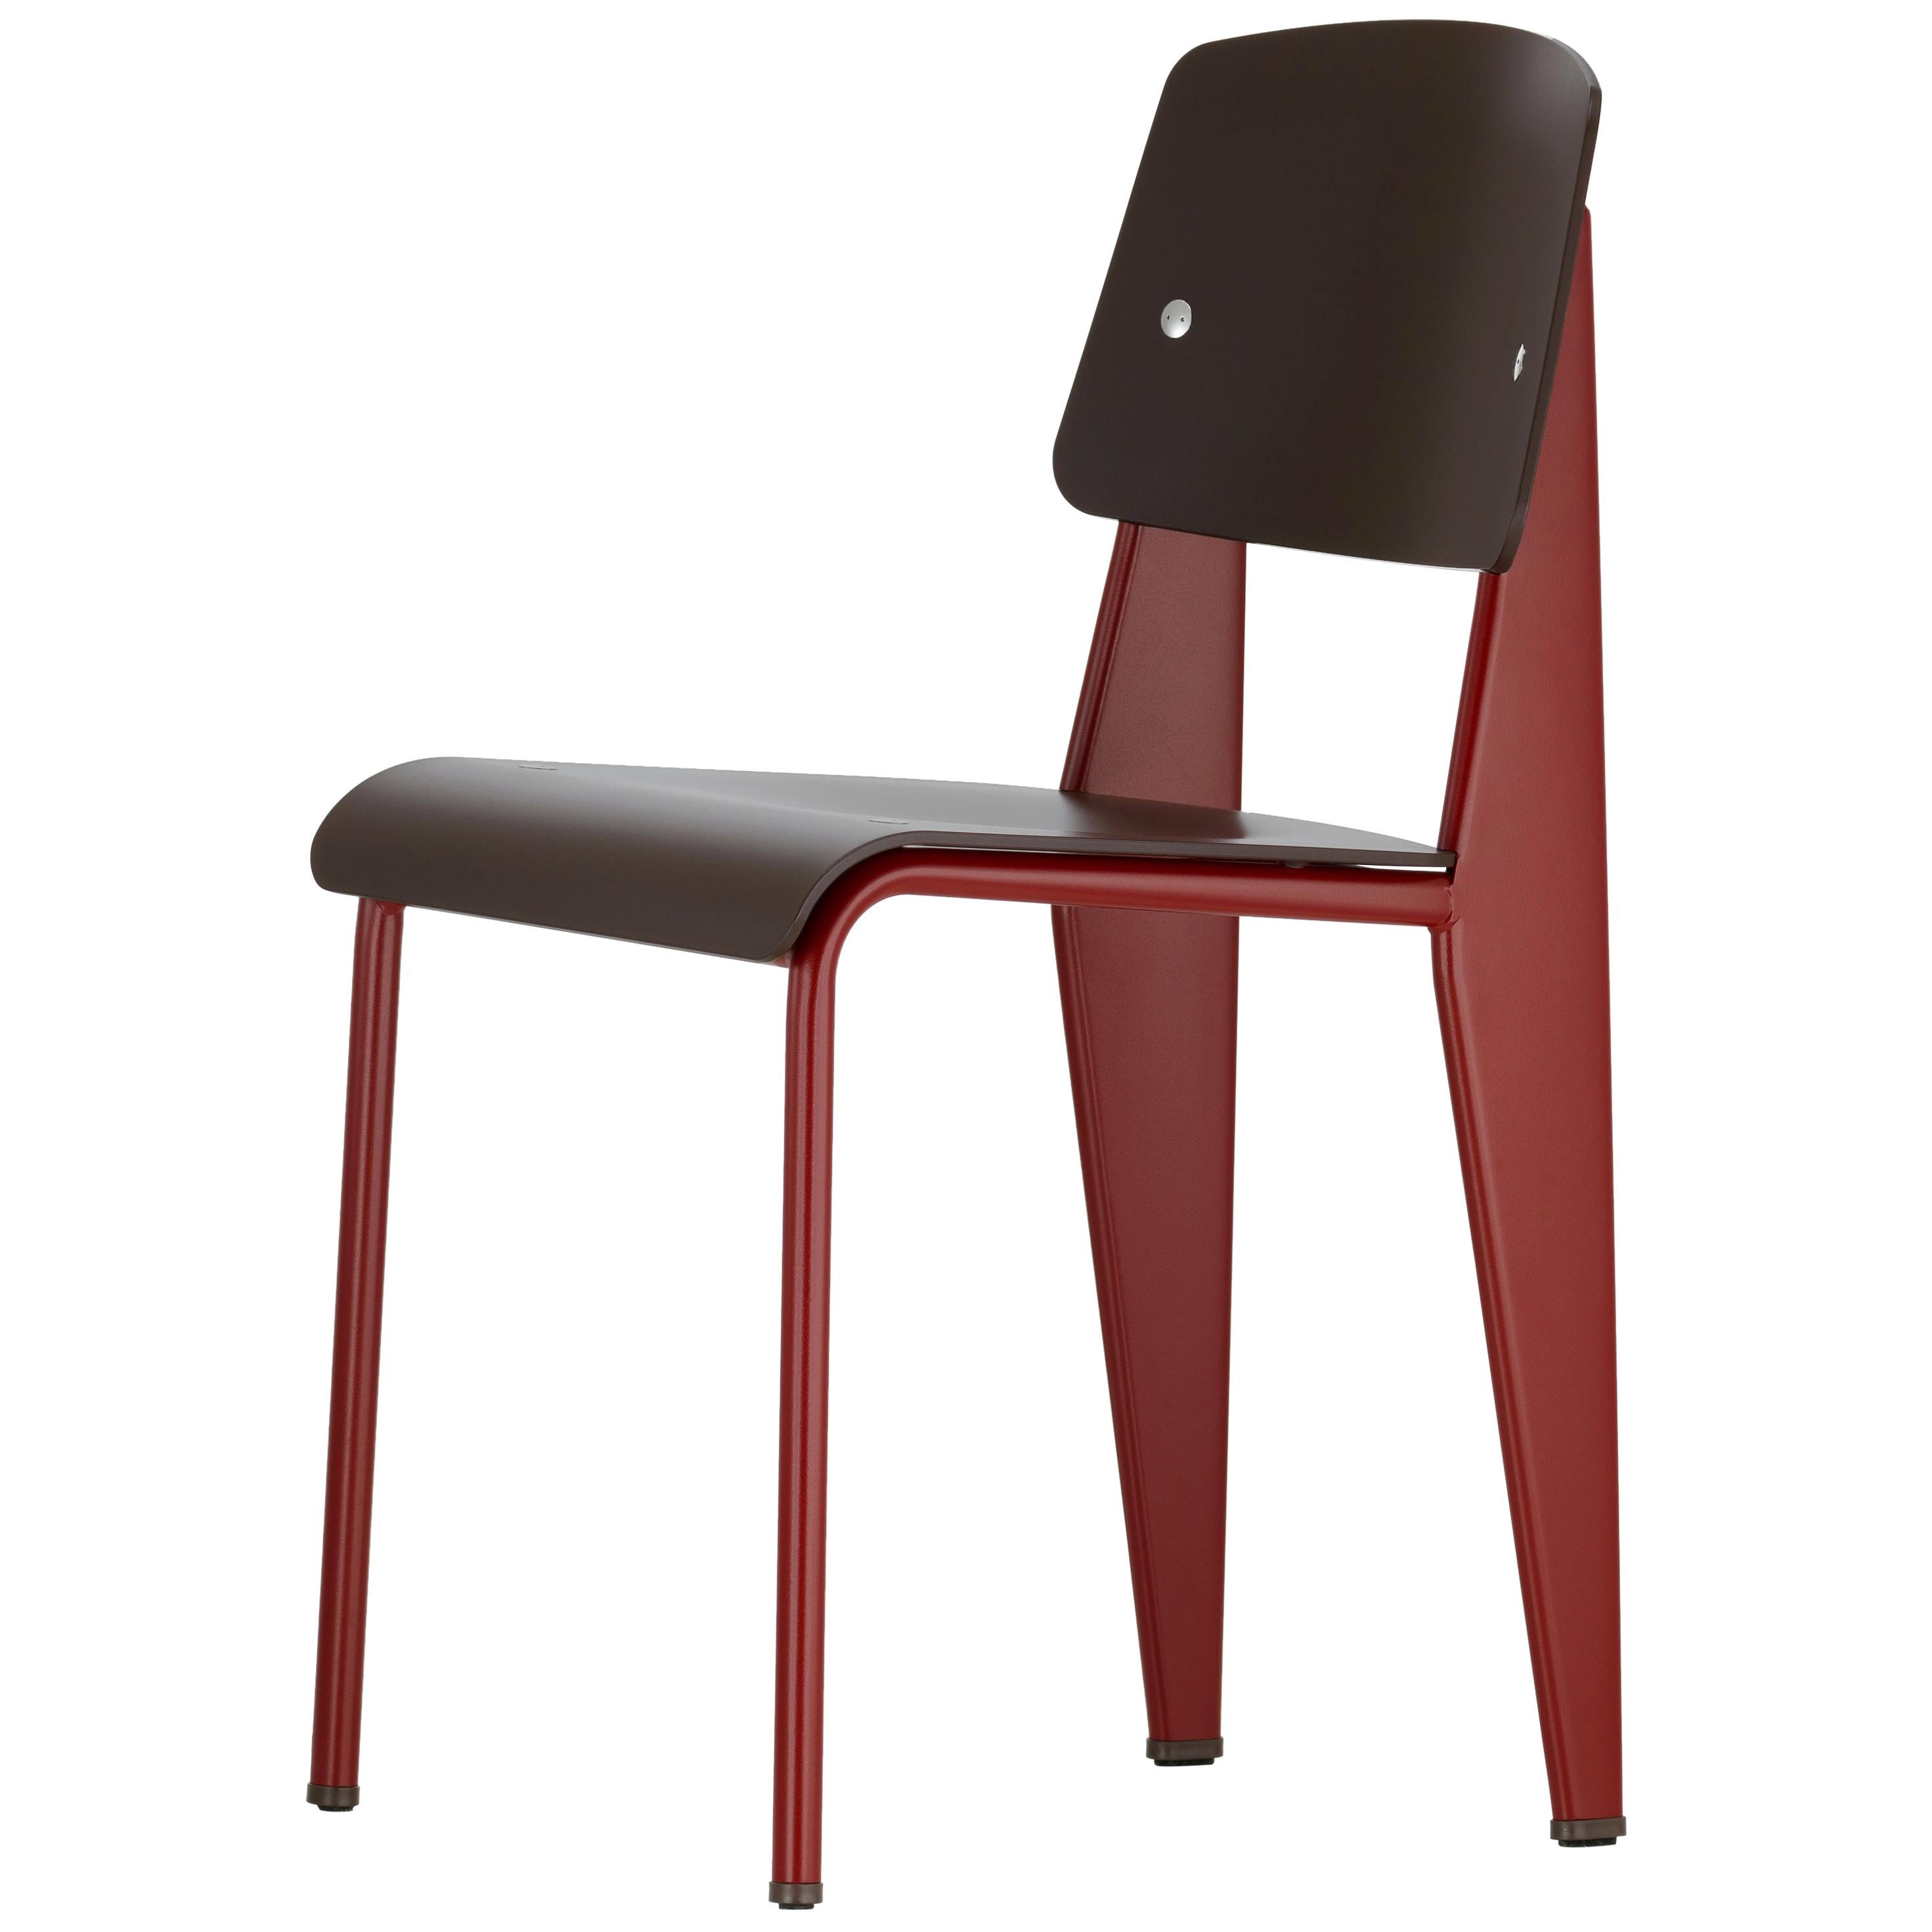 Powder-Coated Set of 6 Jean Prouvé Standard SP Chairs in Teak Brown and Red for Vitra